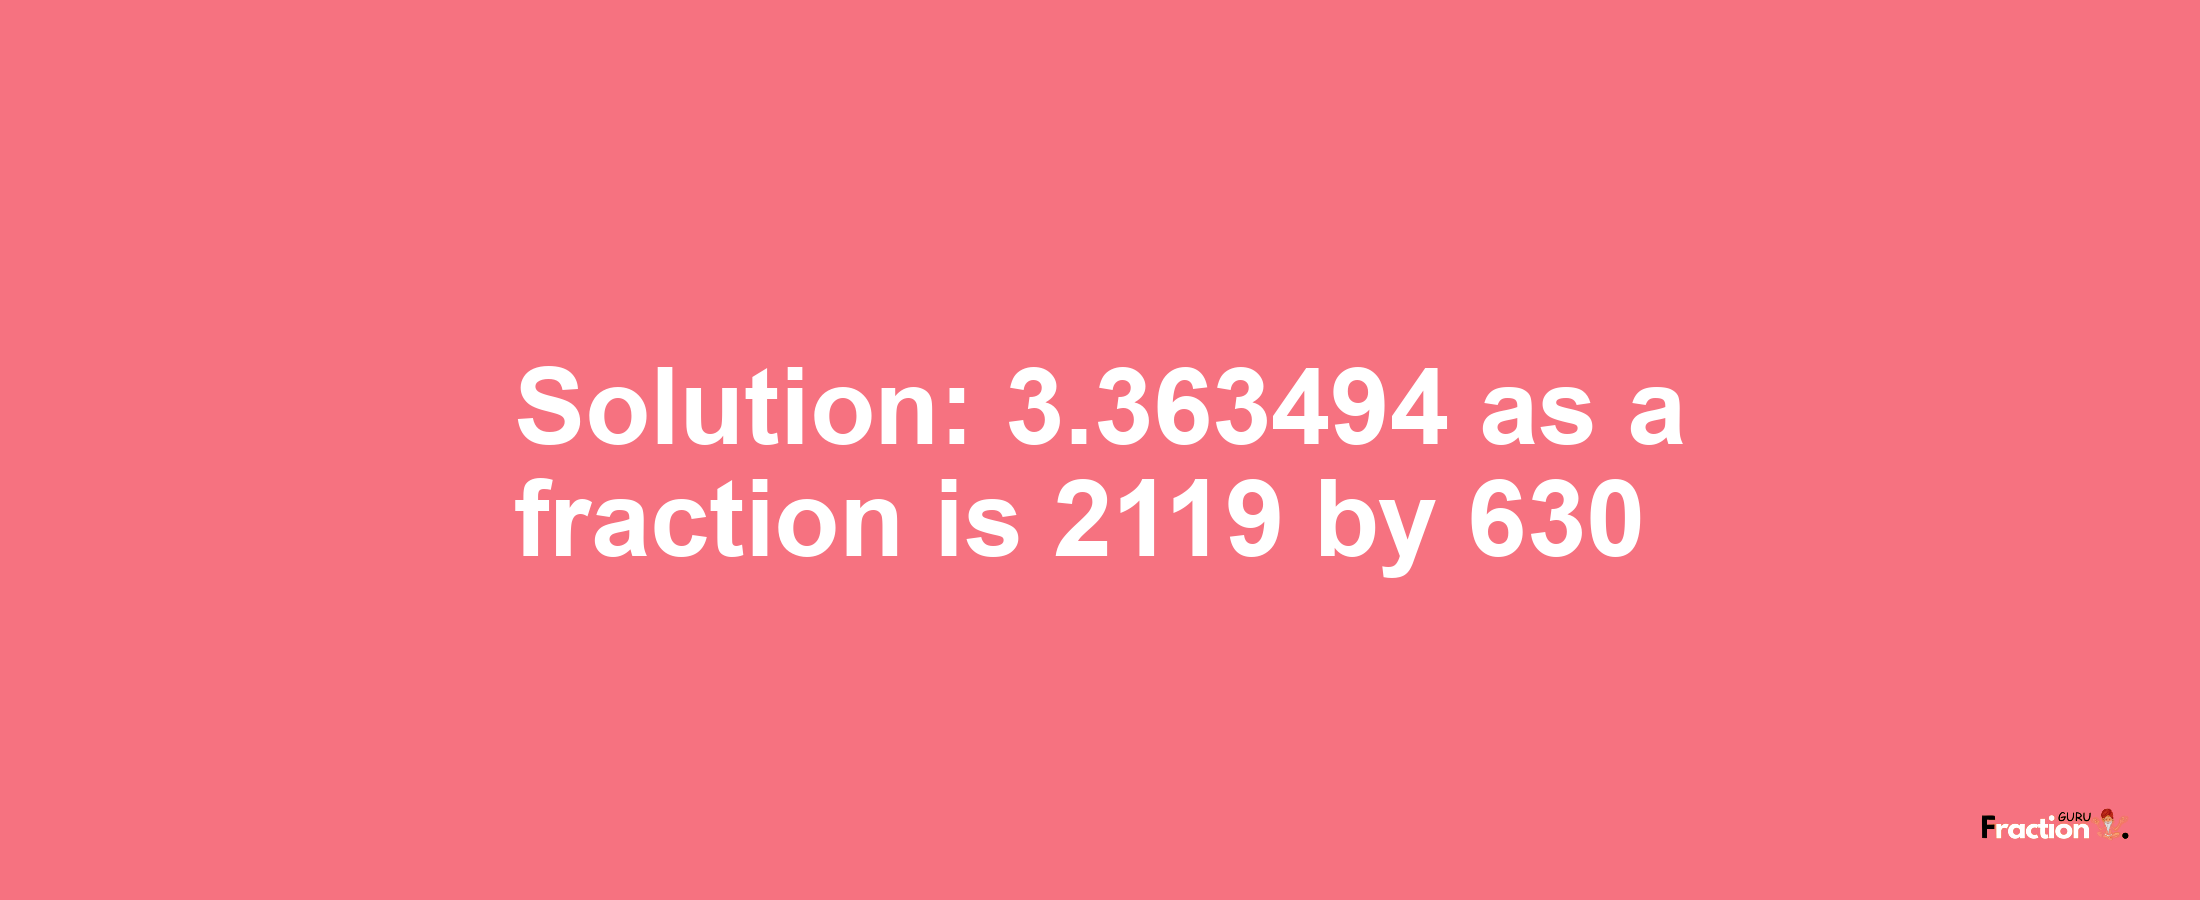 Solution:3.363494 as a fraction is 2119/630